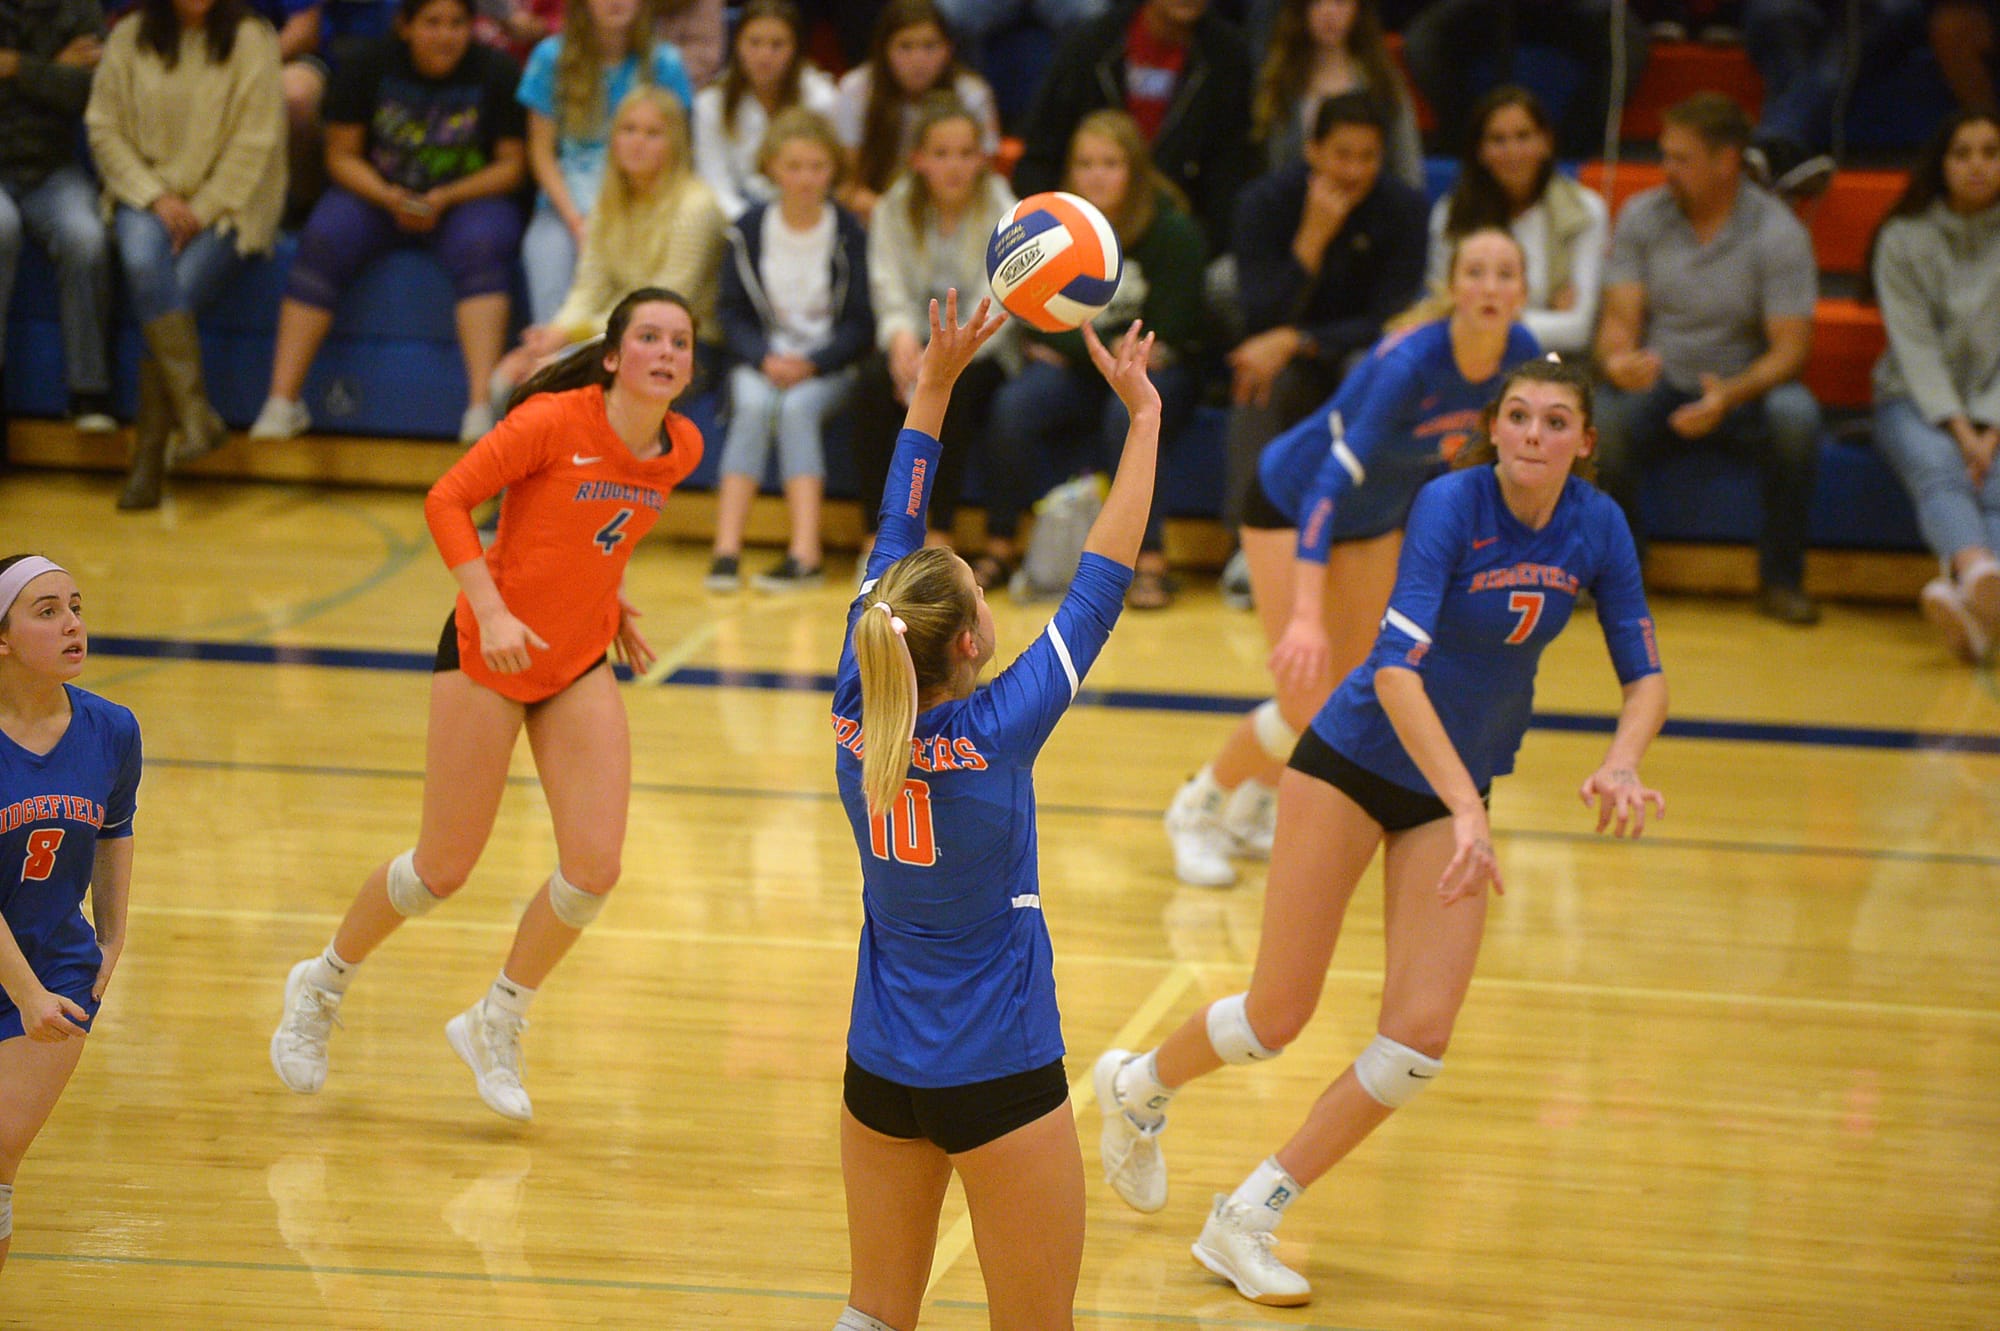 Ridgefield junior Morgan Harter sets the ball for teammate Alicia Andrew during a game against Columbia River at Ridgefield High School on Tuesday, October 8, 2019. Ridgefield won all three sets against Columbia River.